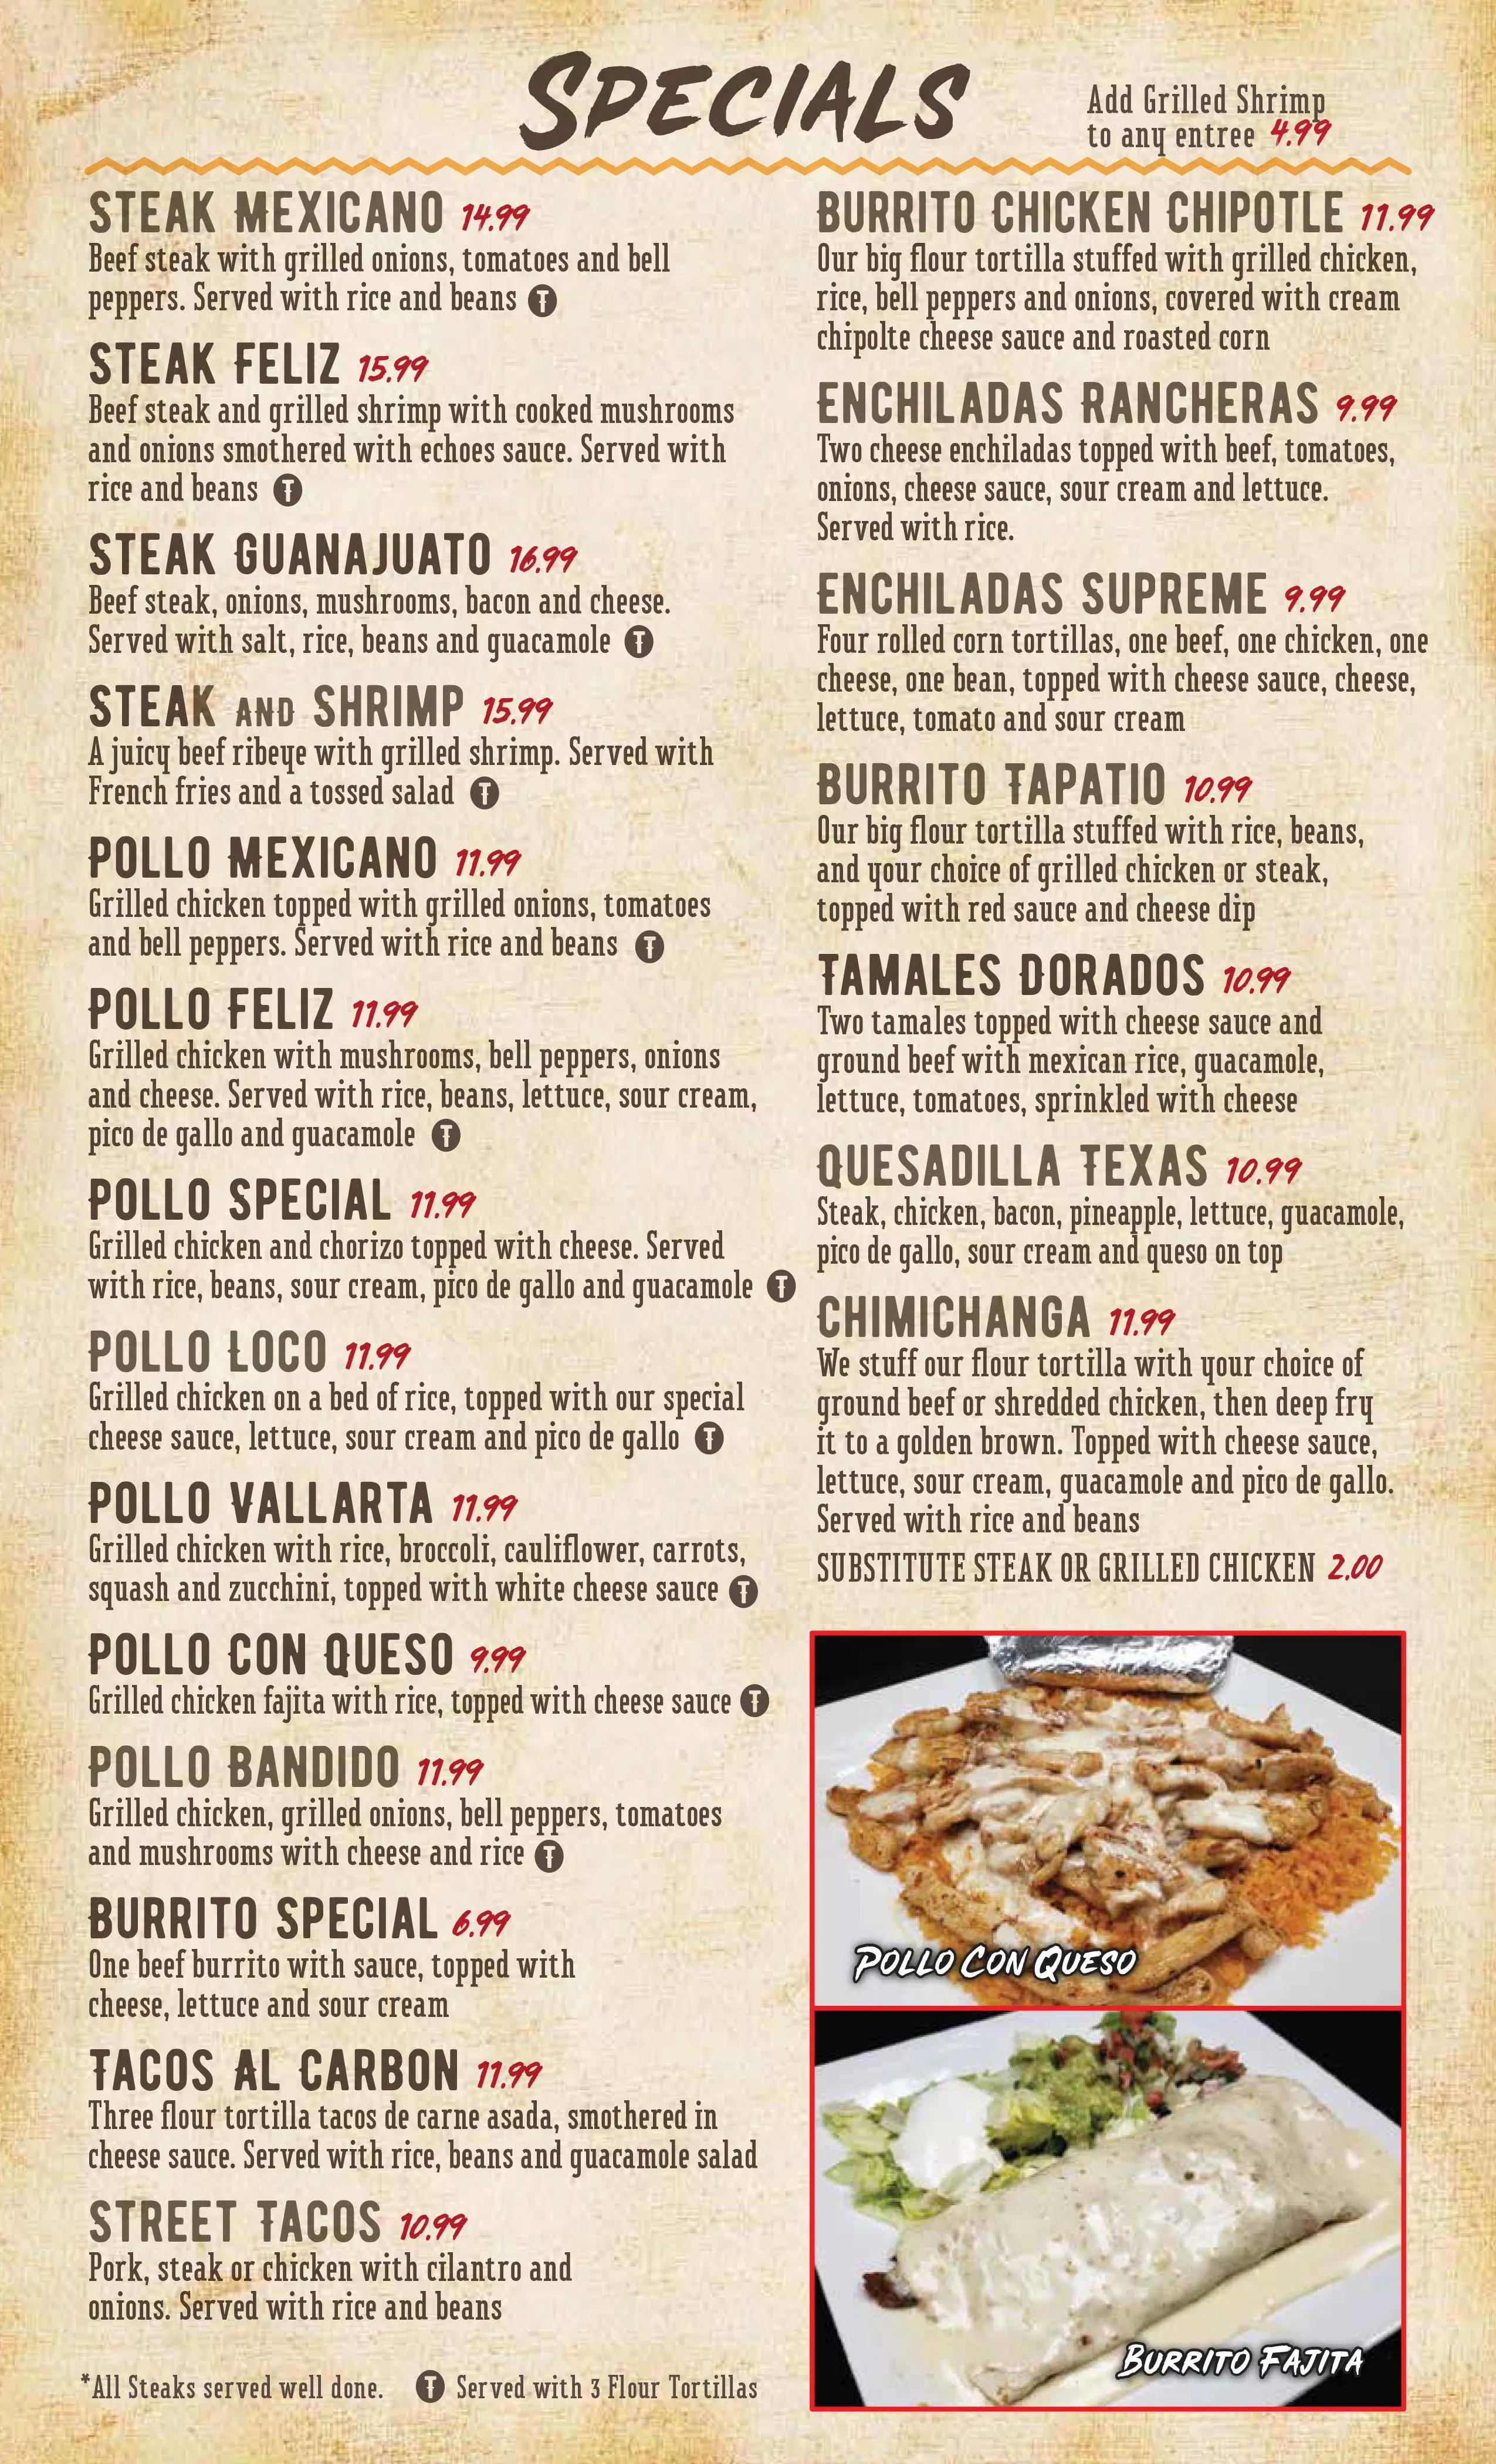 The Rodeo in Okmulgee menu page with specials.